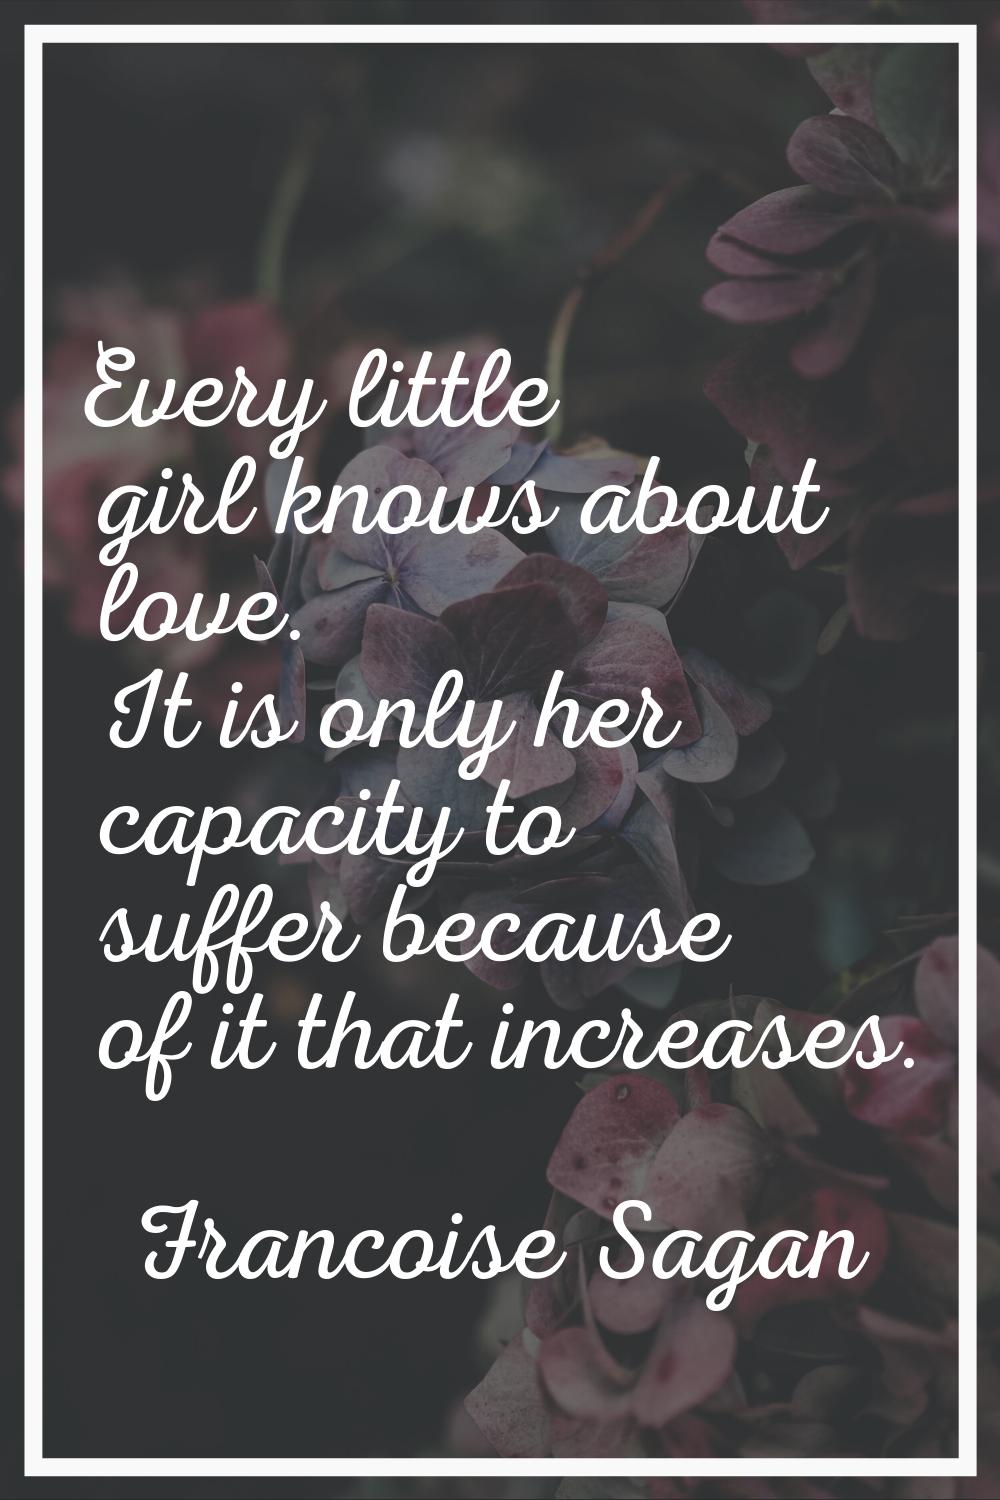 Every little girl knows about love. It is only her capacity to suffer because of it that increases.